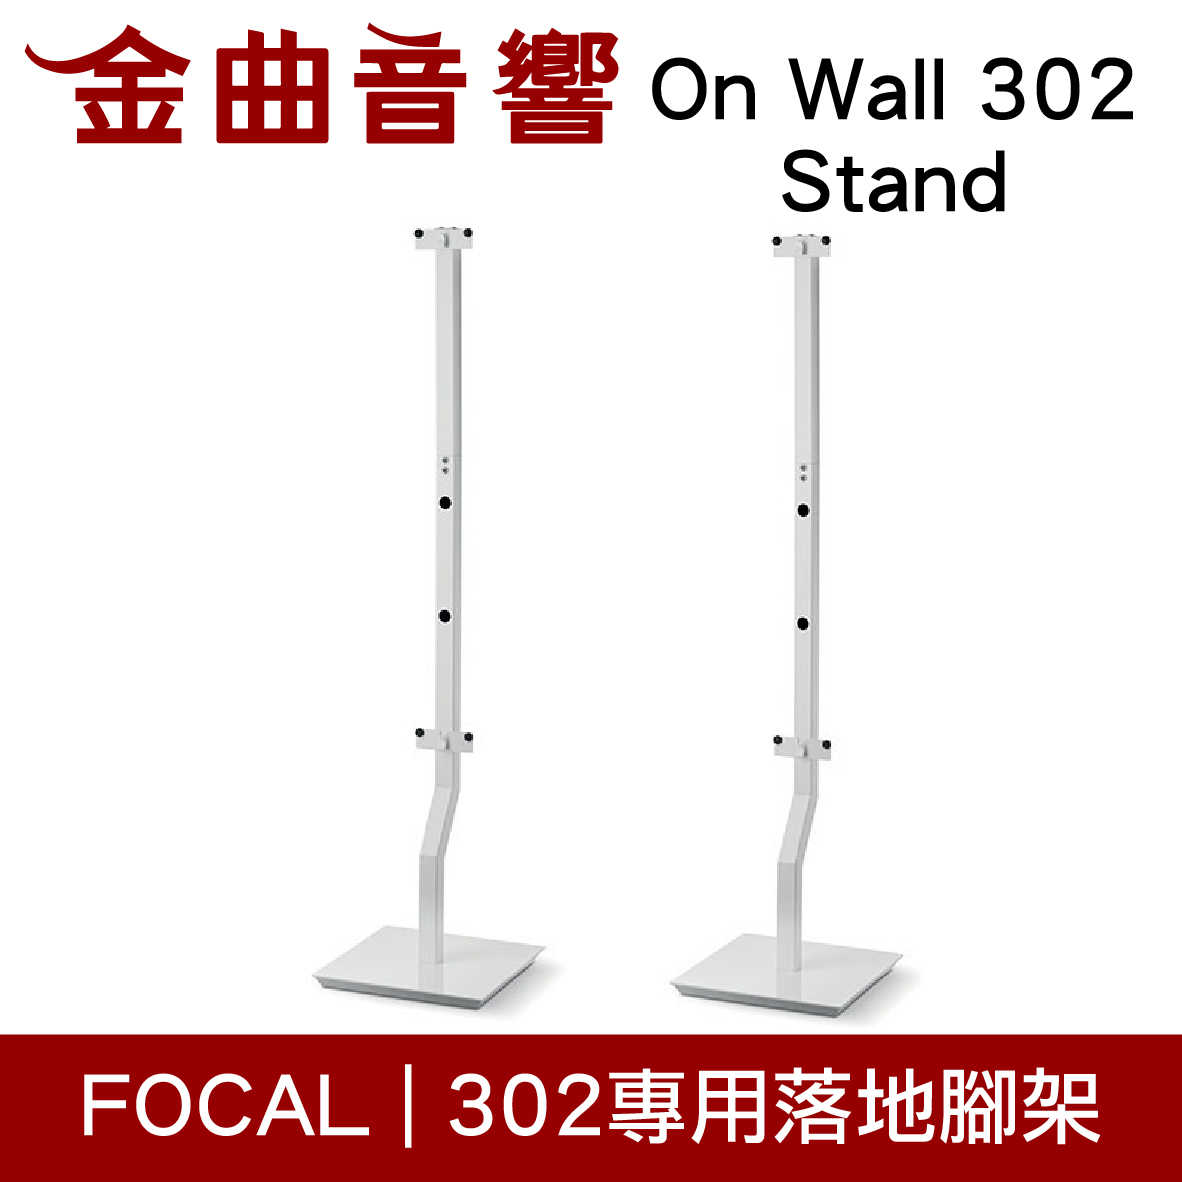 FOCAL On Wall 302 Stand 專用 支架 落地腳架（一對）| 金曲音響